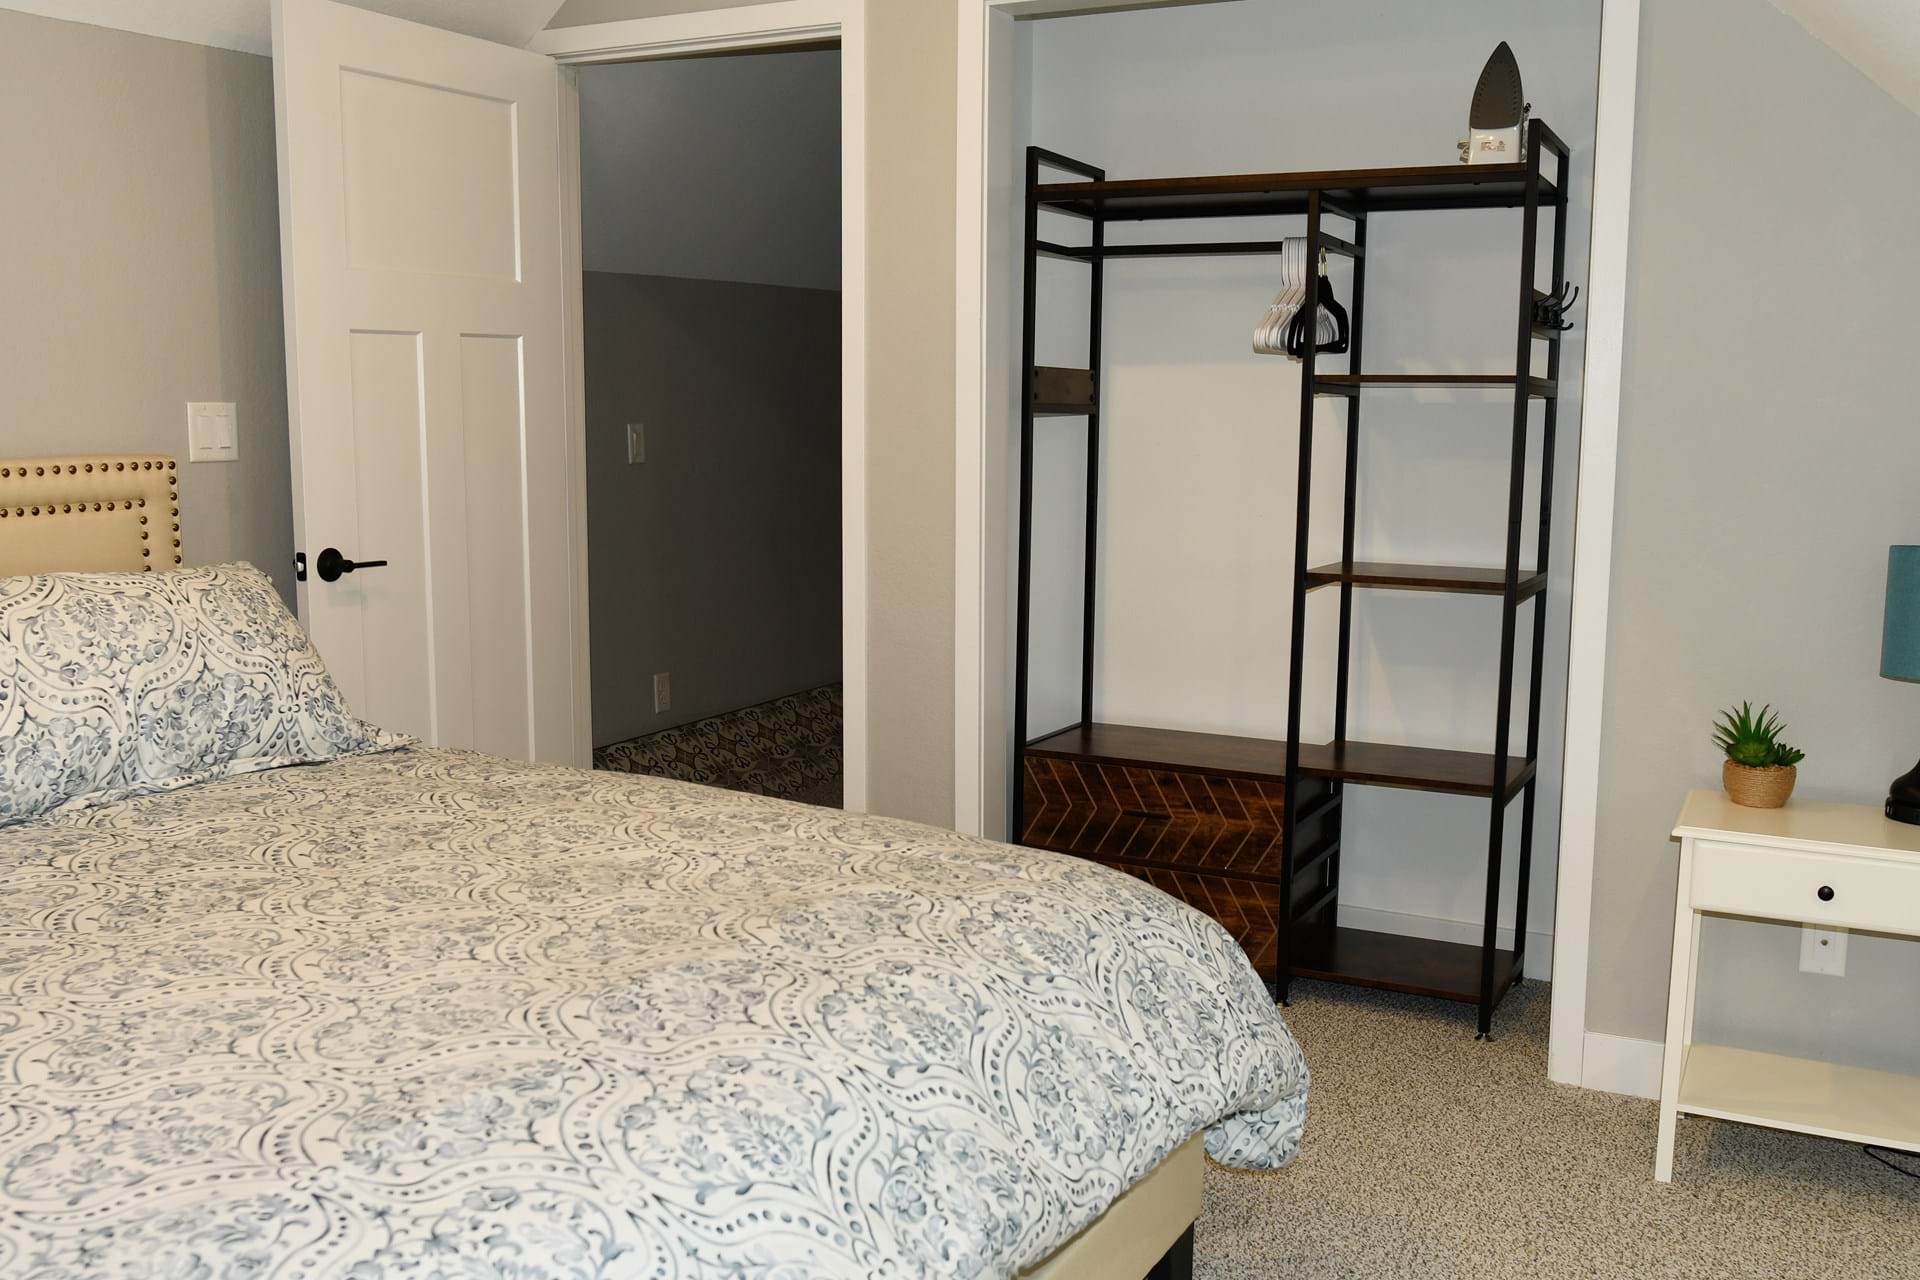 Deluxe King Size Guest Room